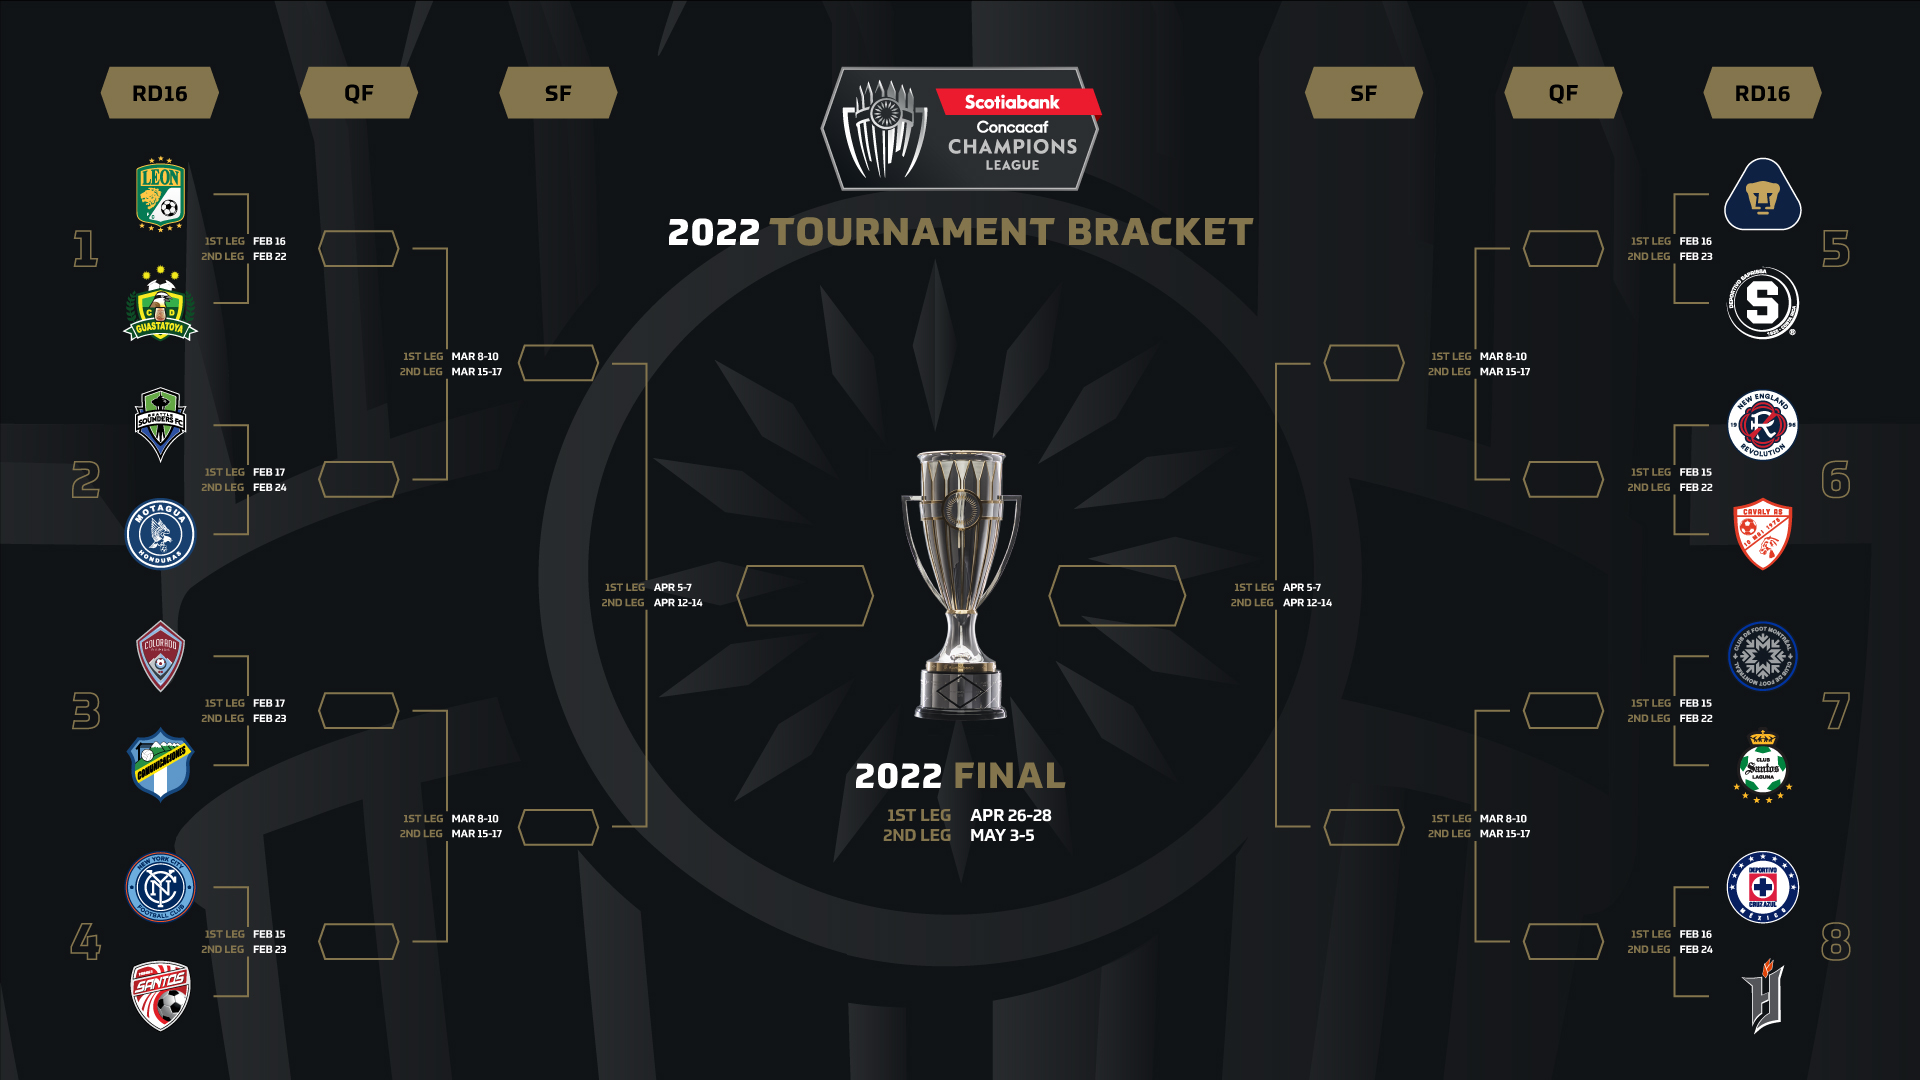 Round of 16 schedule announced for 2022 Scotiabank Concacaf Champions